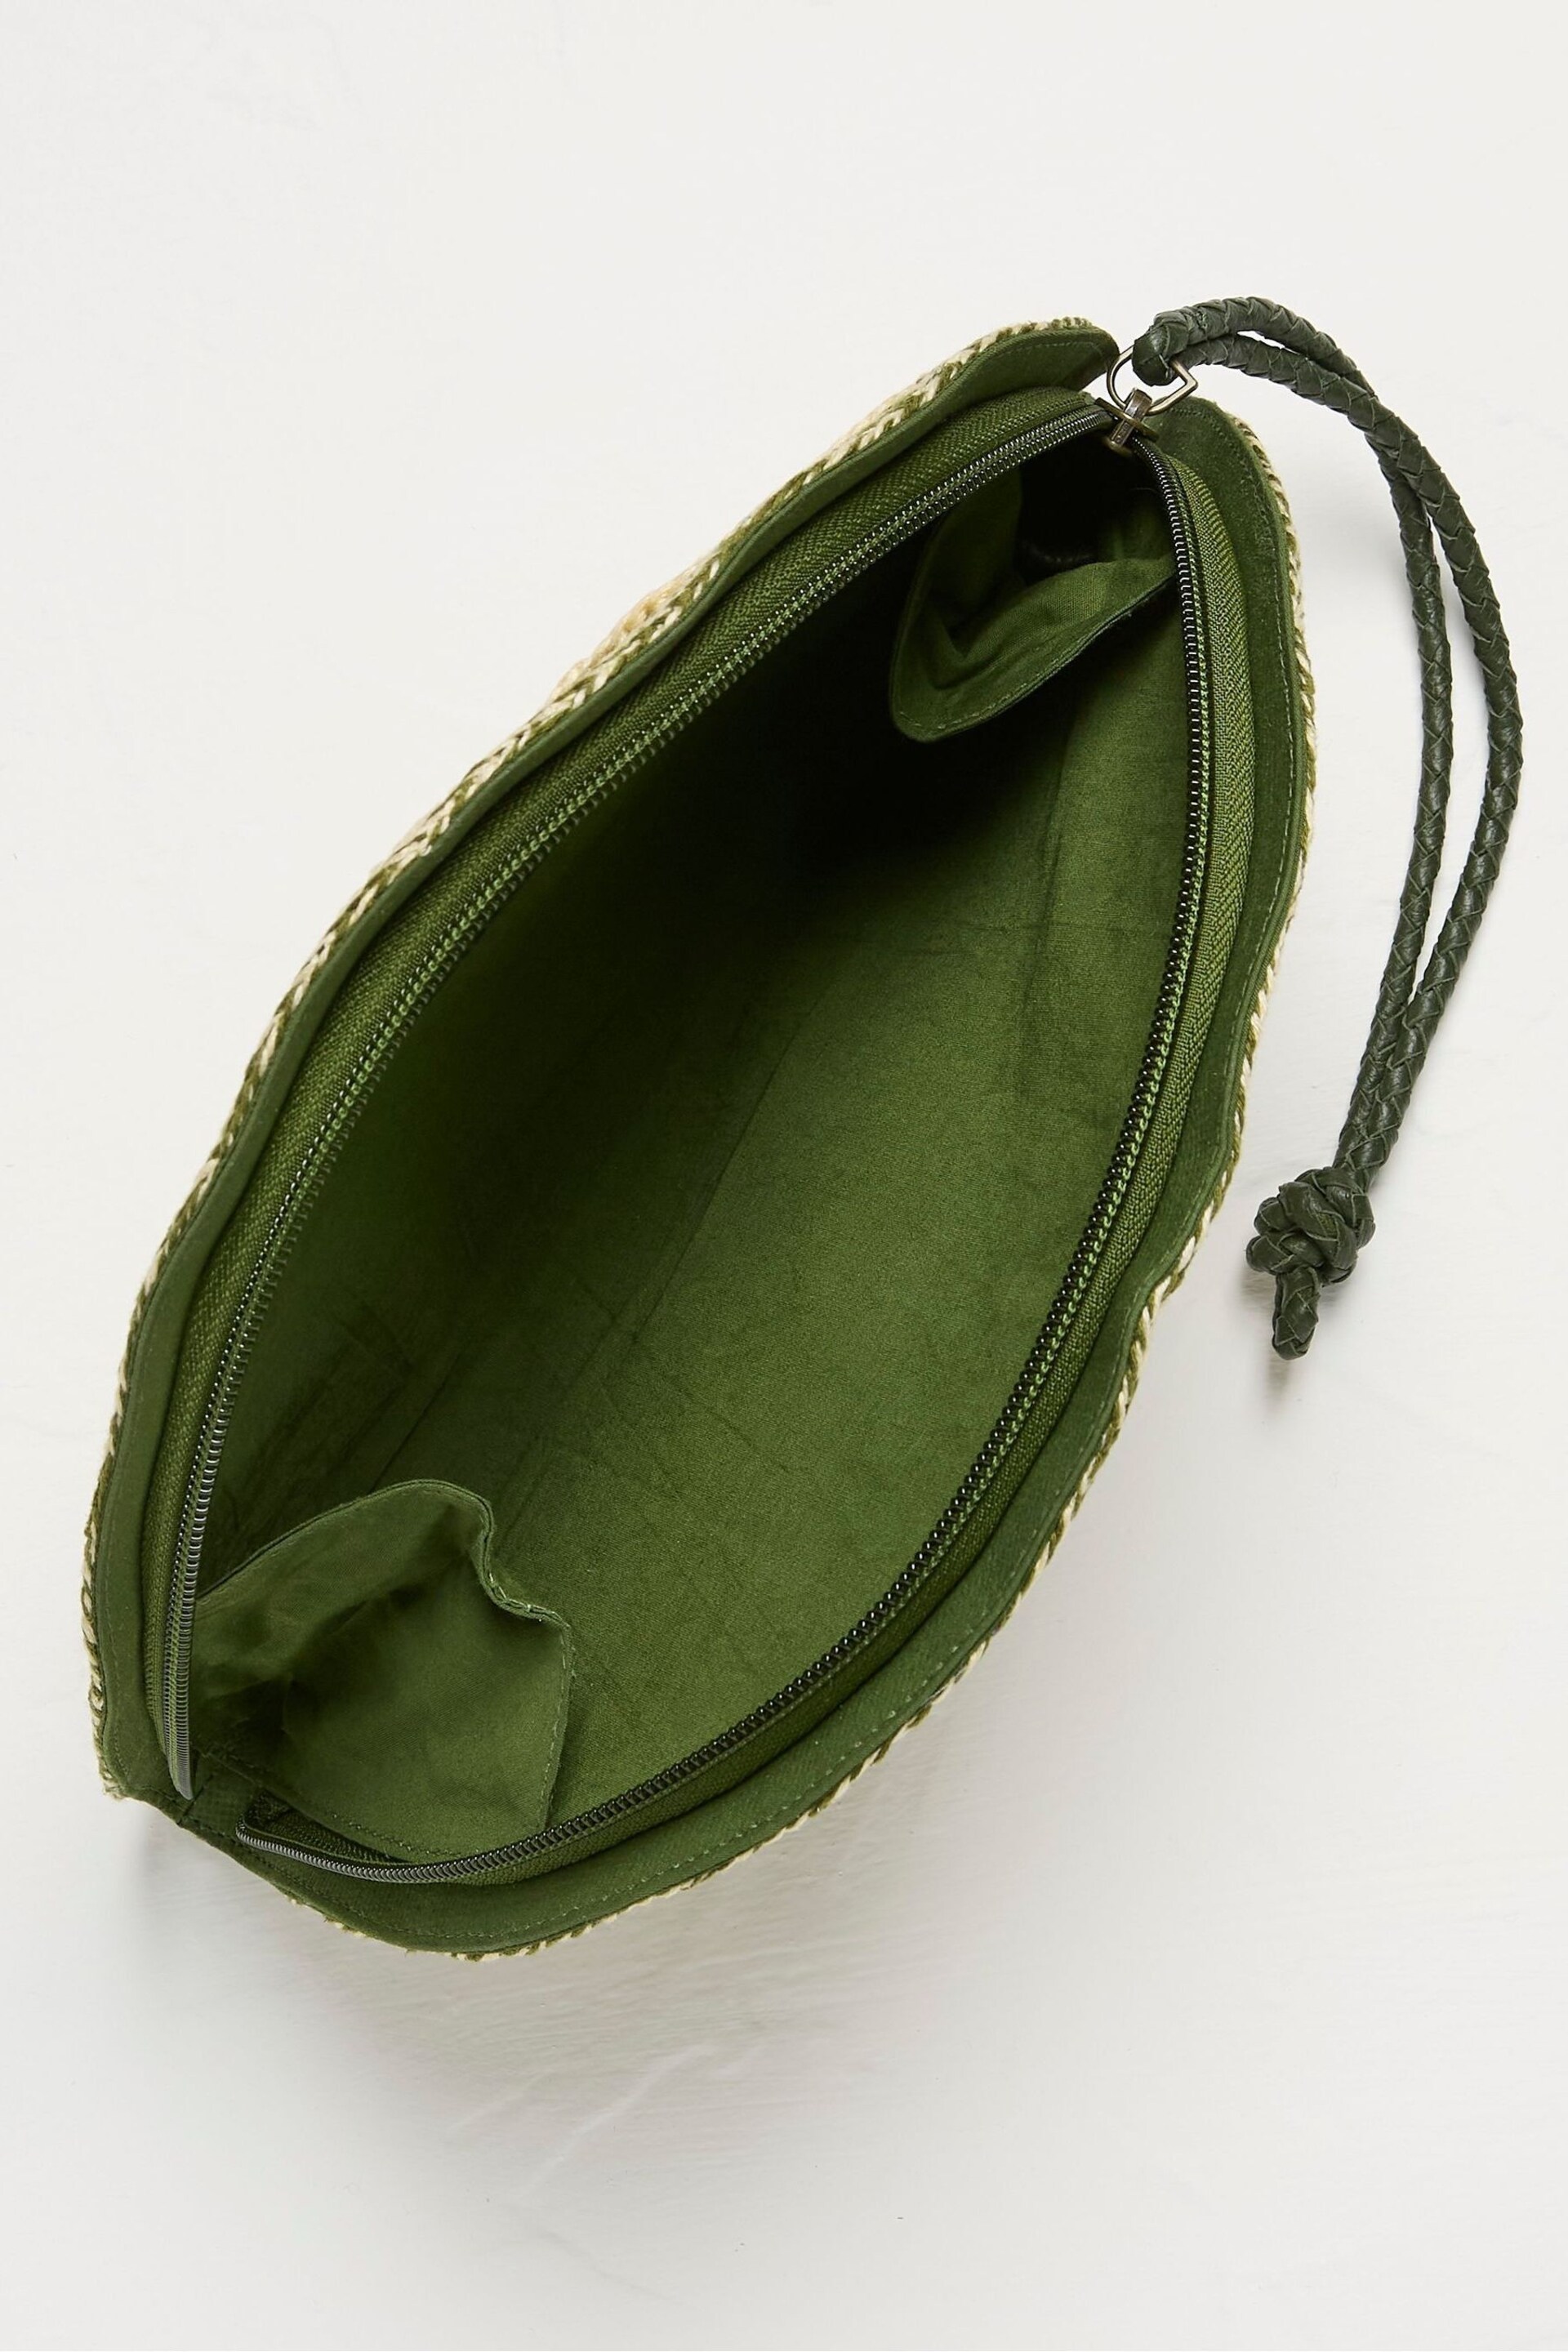 FatFace Green Scalloped Clutch Bag - Image 2 of 3